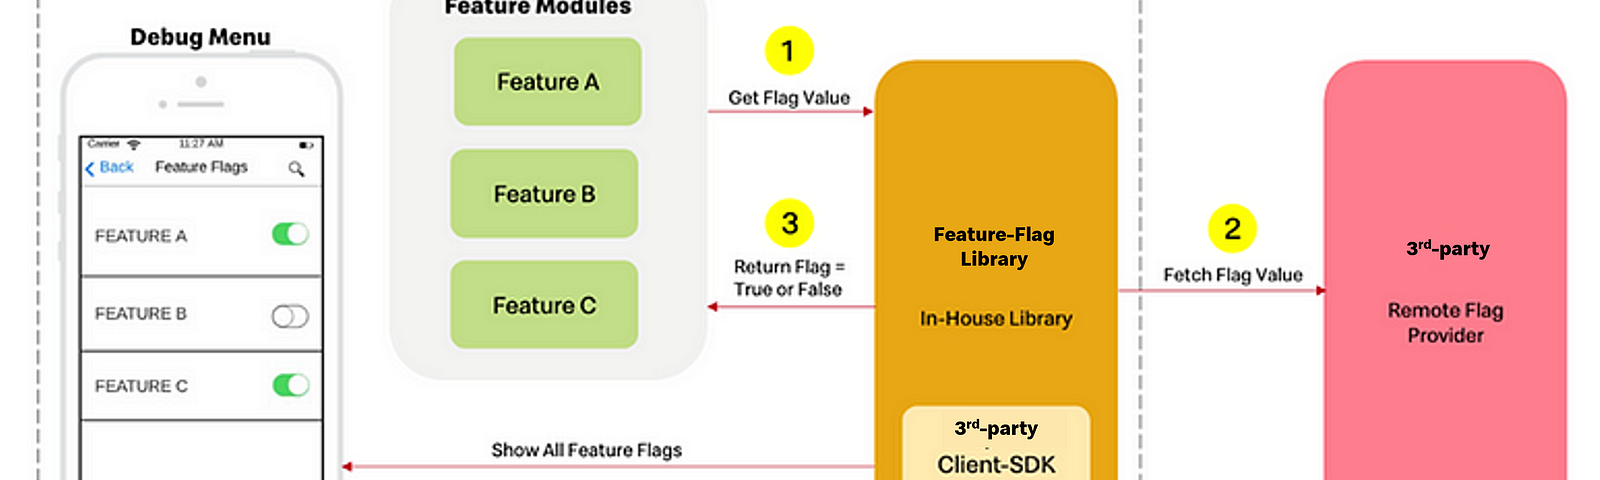 The image displays a flow diagram of the high-level architecture of the JustFlip feature flagging integration.